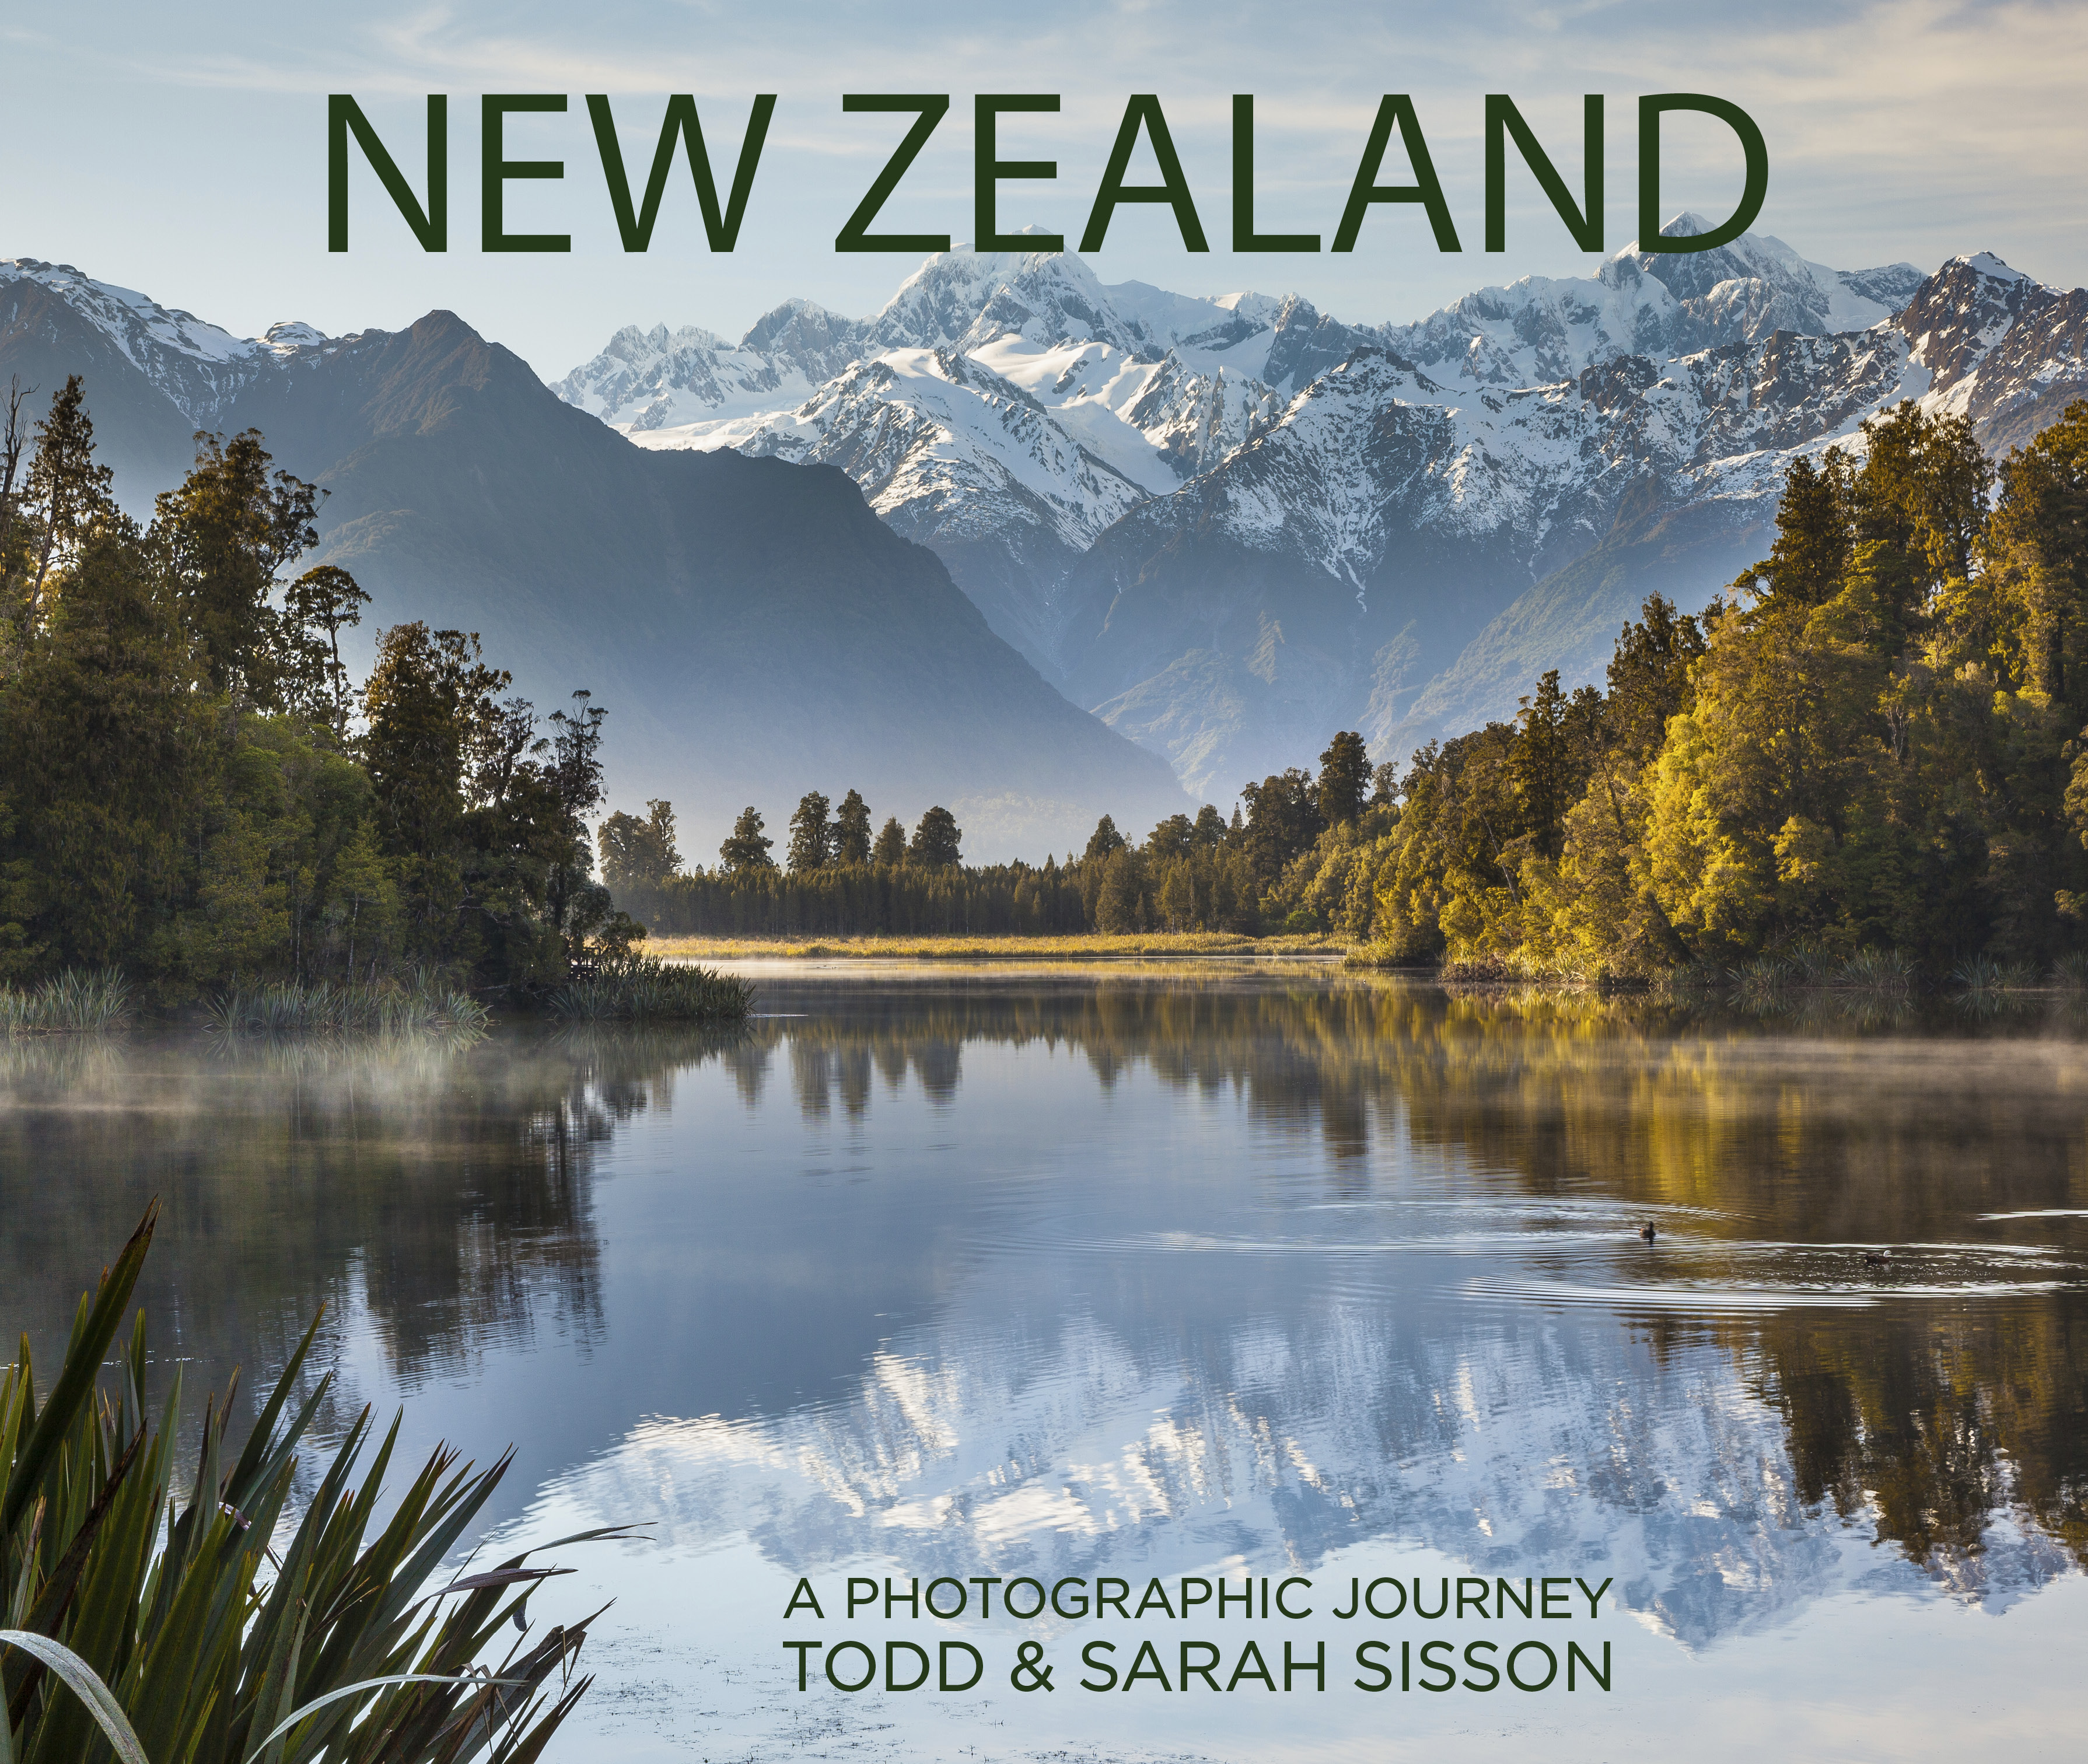 New Zealand: A Photographic Journey